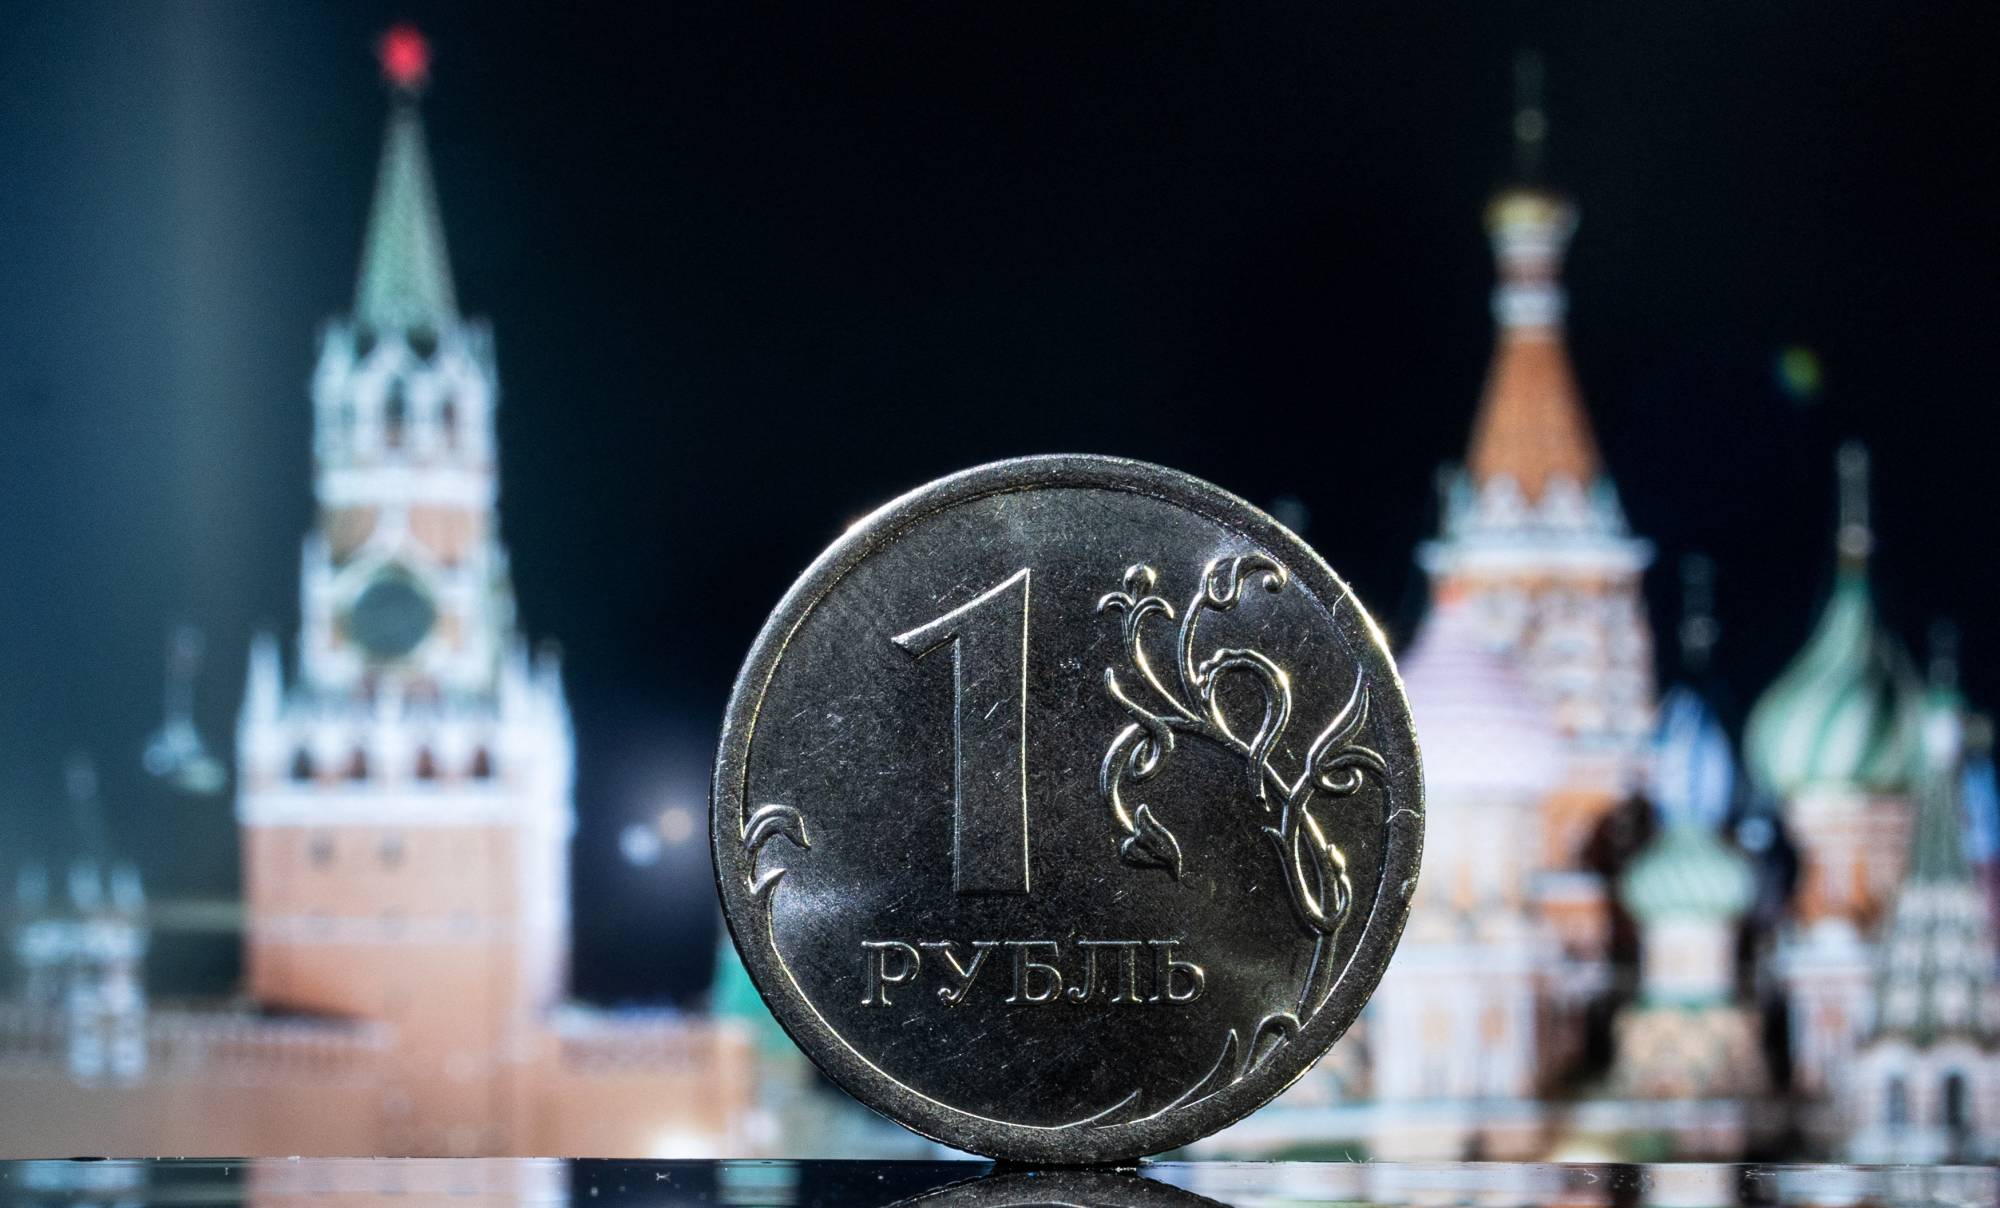 A Russian one rouble coin is pictured in front of a monitor showing St. Basil's Cathedral and a tower of Moscow's Kremlin in this illustration taken June 24, 2022. REUTERS/Maxim Shemetov/Illustration